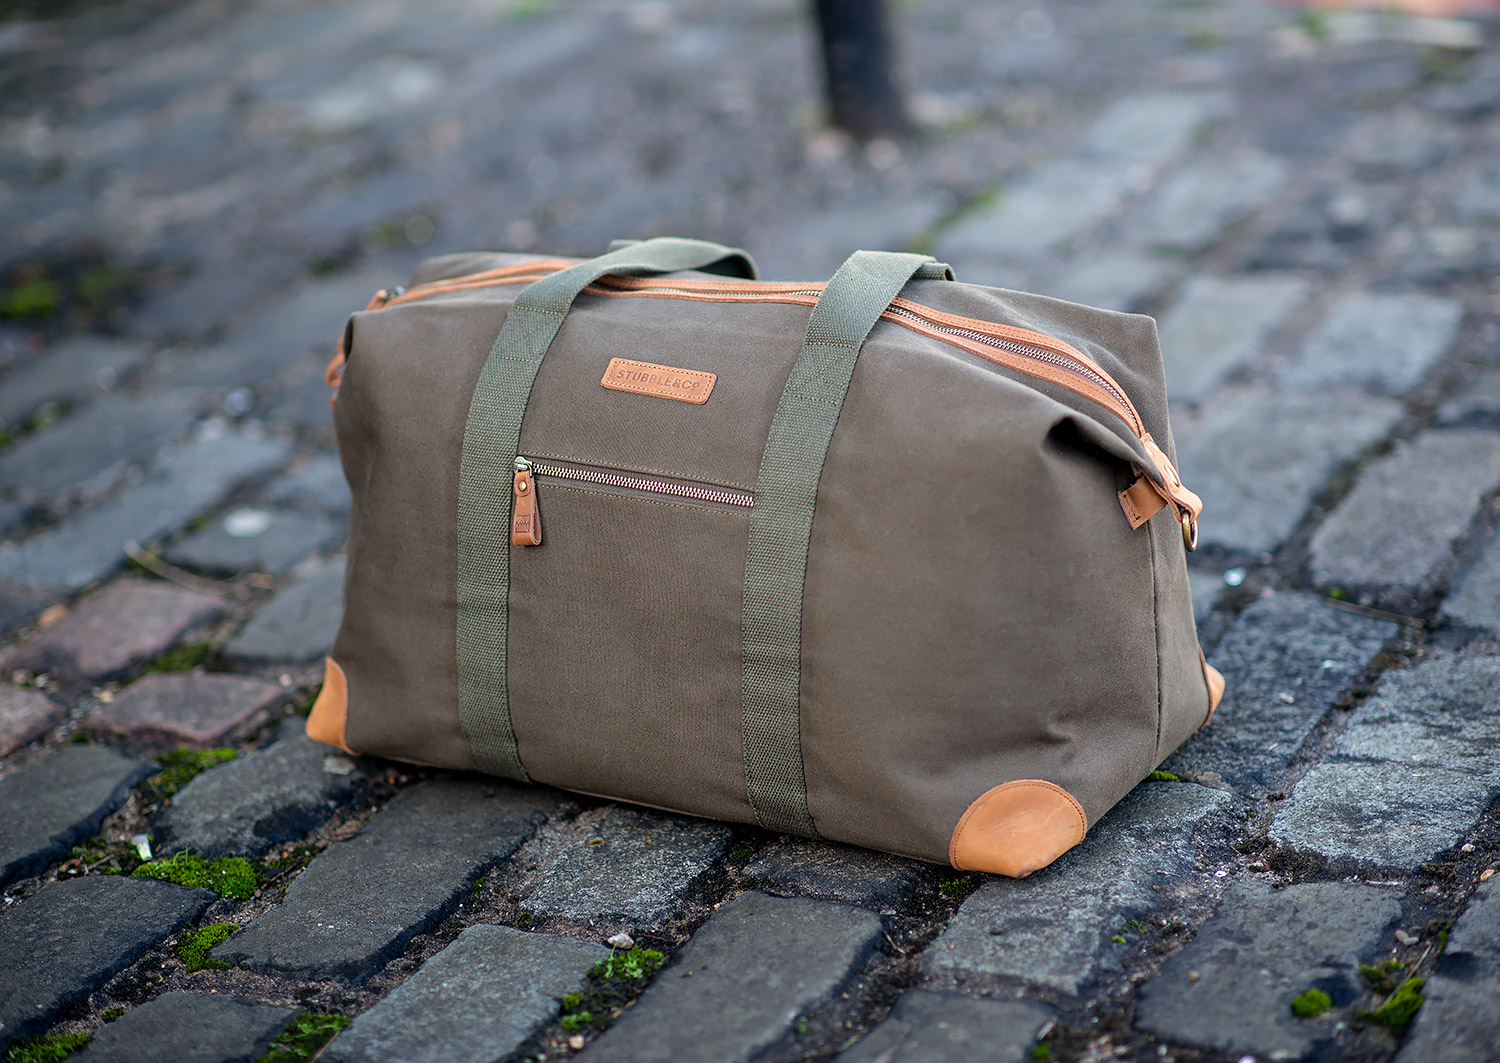 Stubble & Co Weekender Bag Review - Your Average Guy